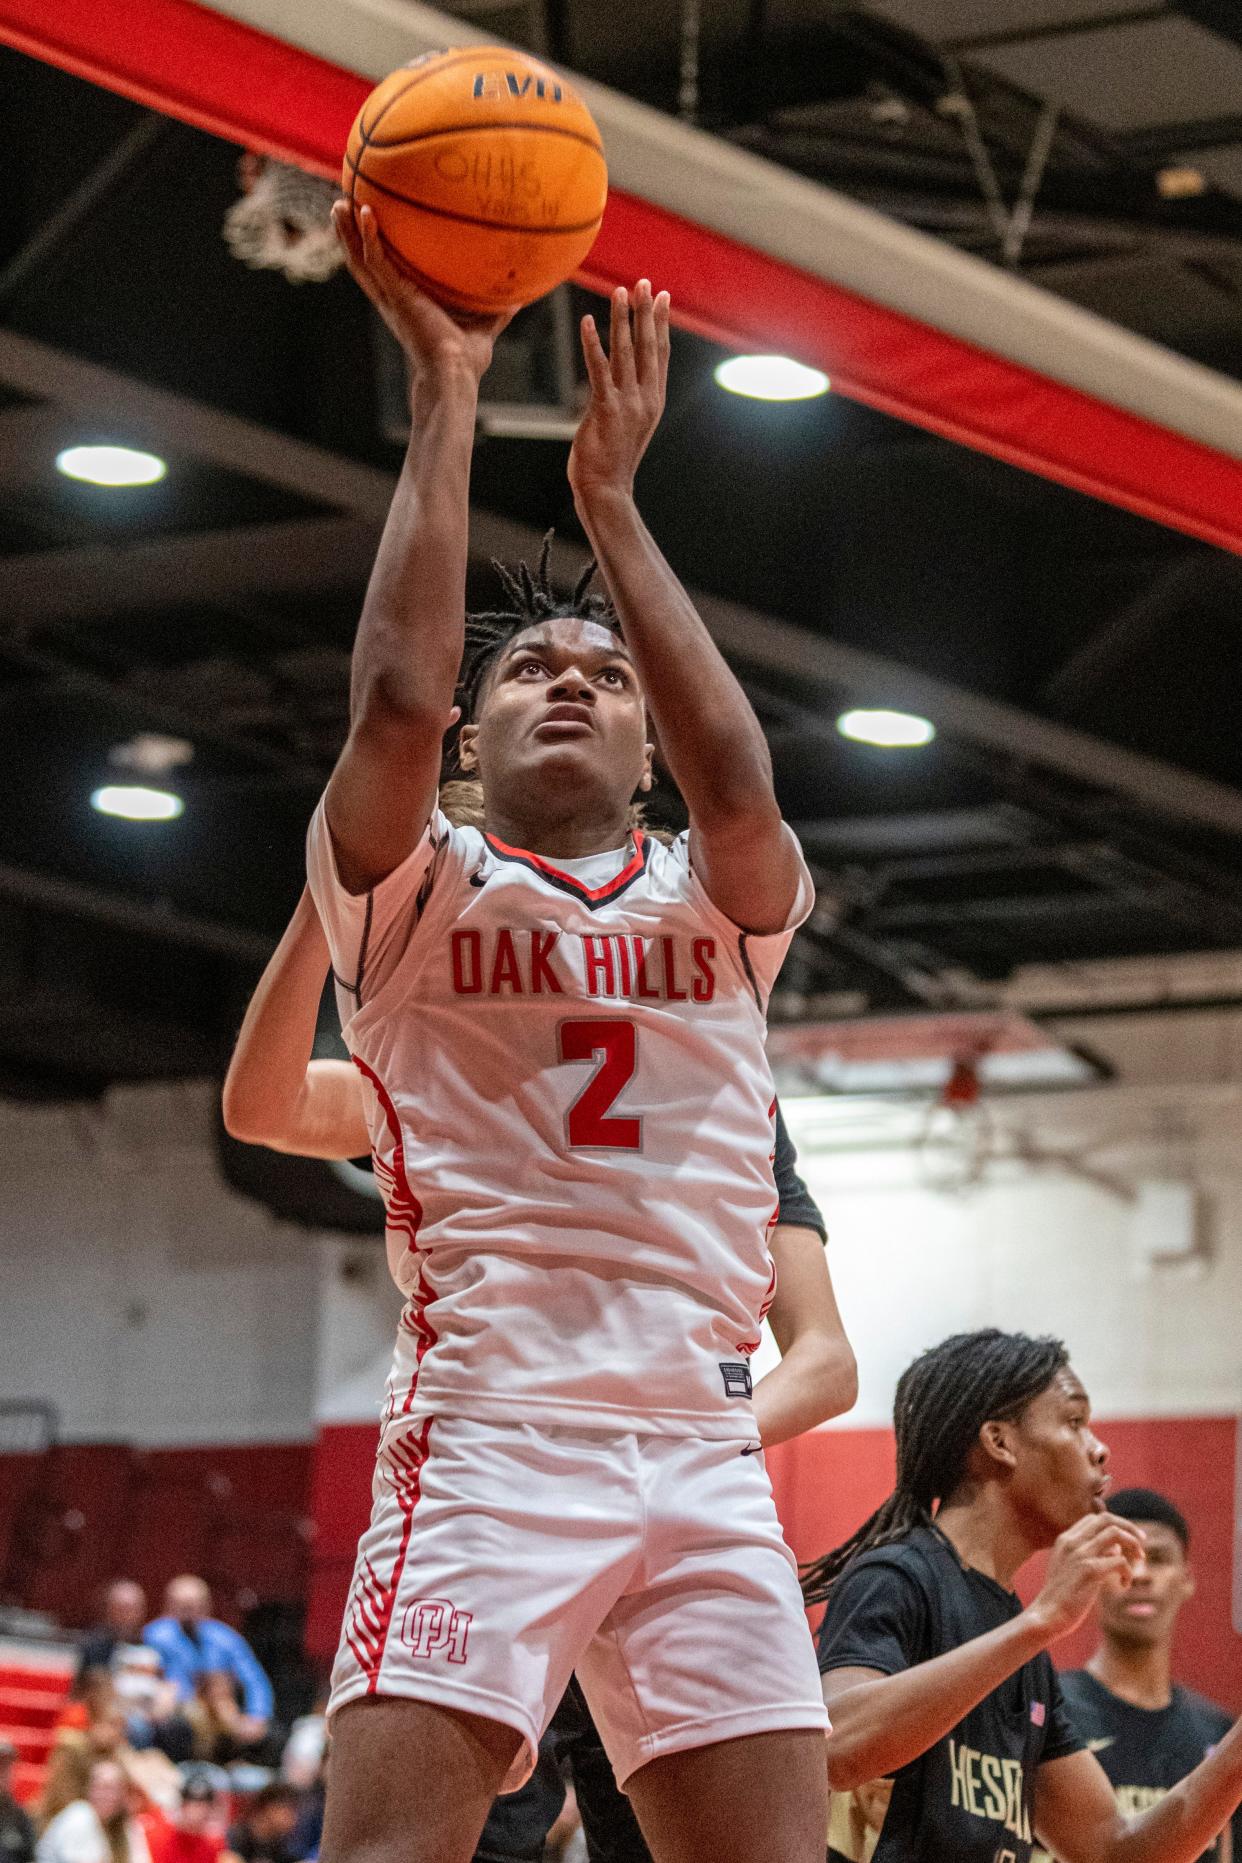 Oak Hills’ Kenneth Brown shoots the ball against Hesperia on Tuesday, Jan. 3, 2023. The Bulldogs beat Hesperia 59-53 in the Mojave River League opener.